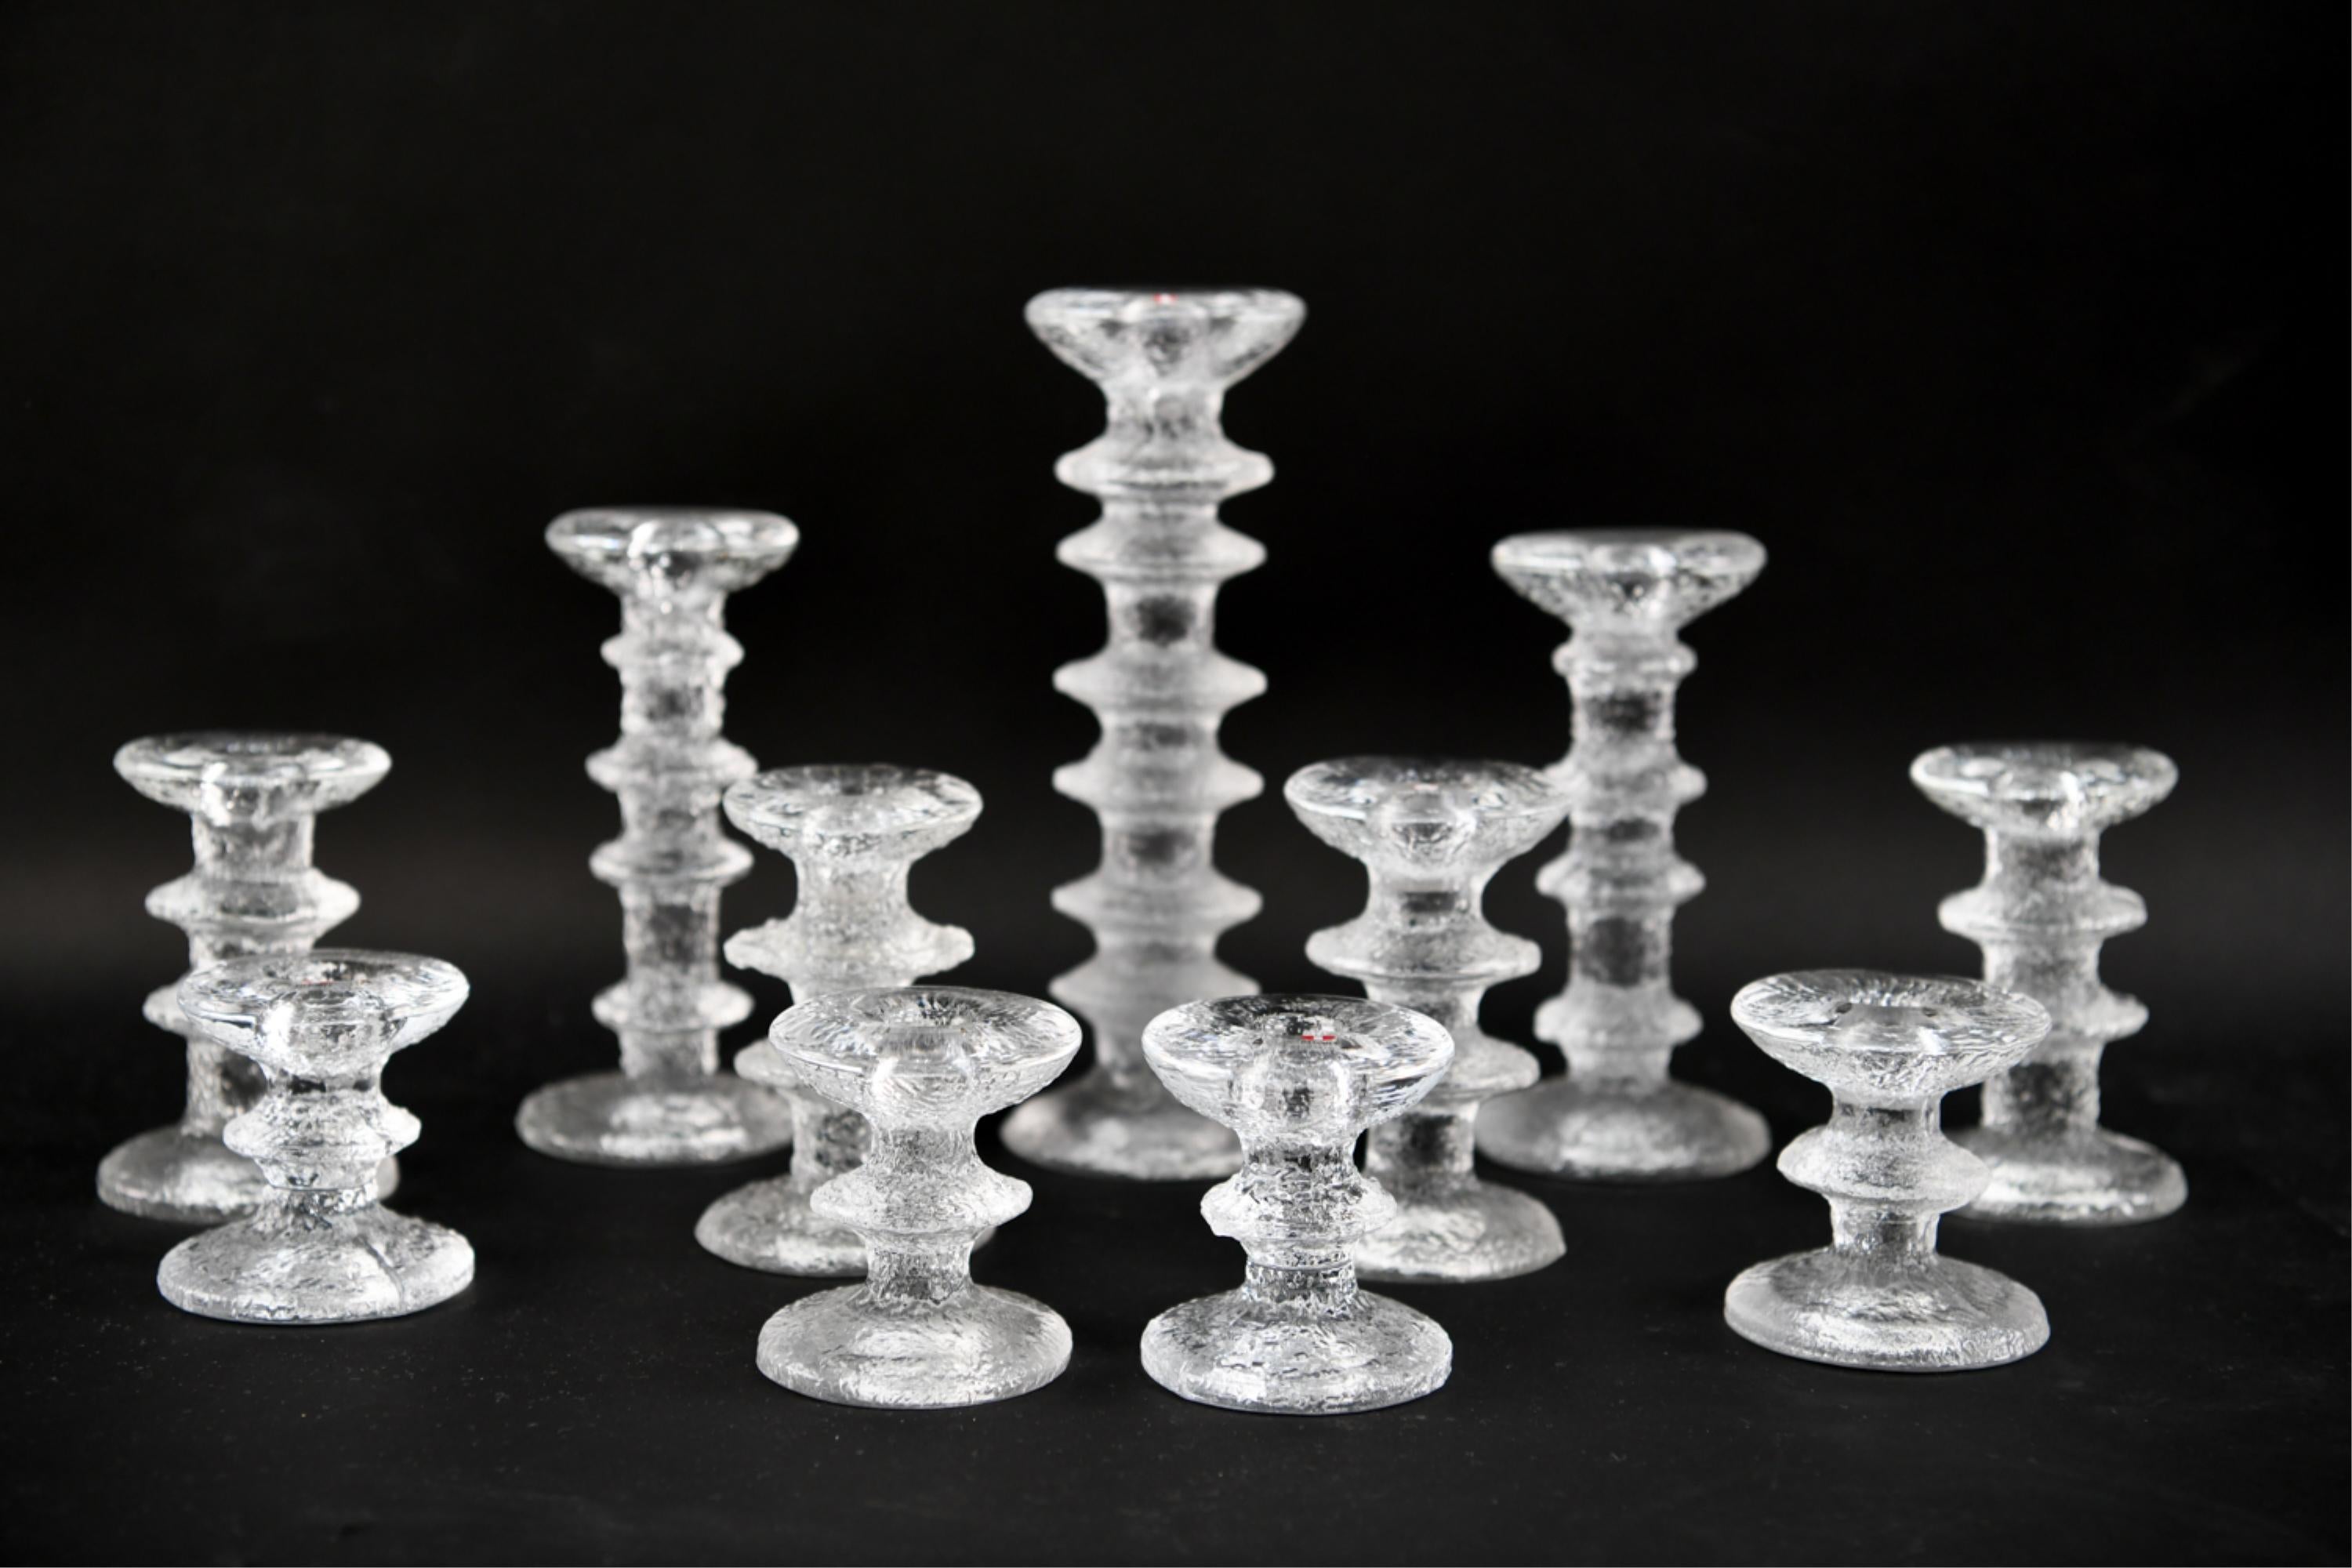 Great set of eleven vintage glass candlesticks by Timo Sarpaneva for Iittala.
They range from 12.5 in. high to 5 in. high.